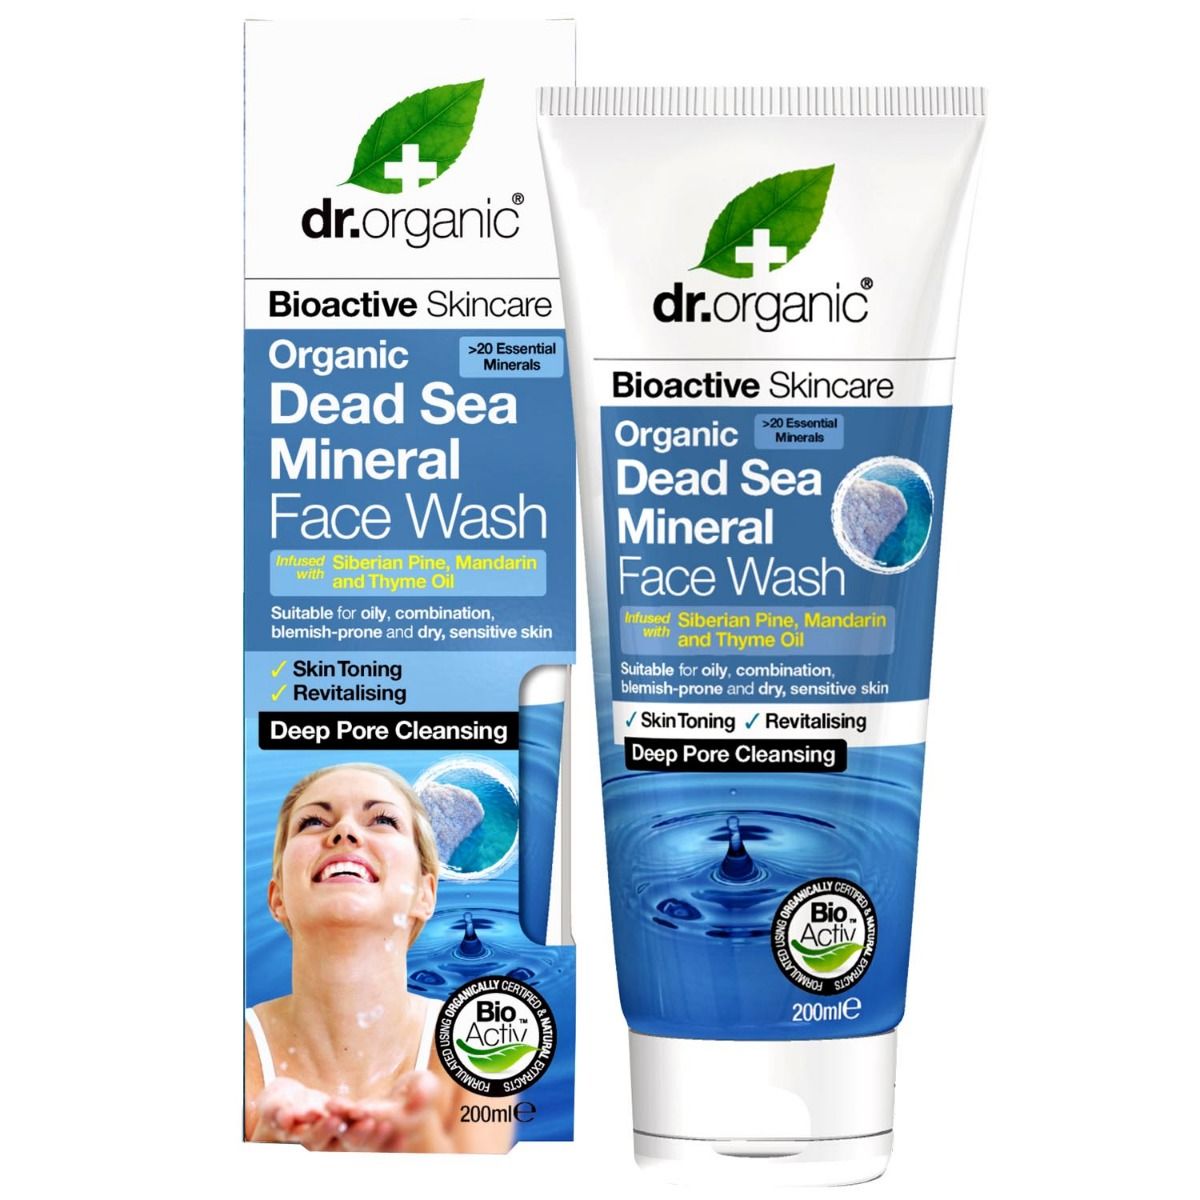 dr.organic Dead Sea Mineral Face Wash, 200 ml, Pack of 1 